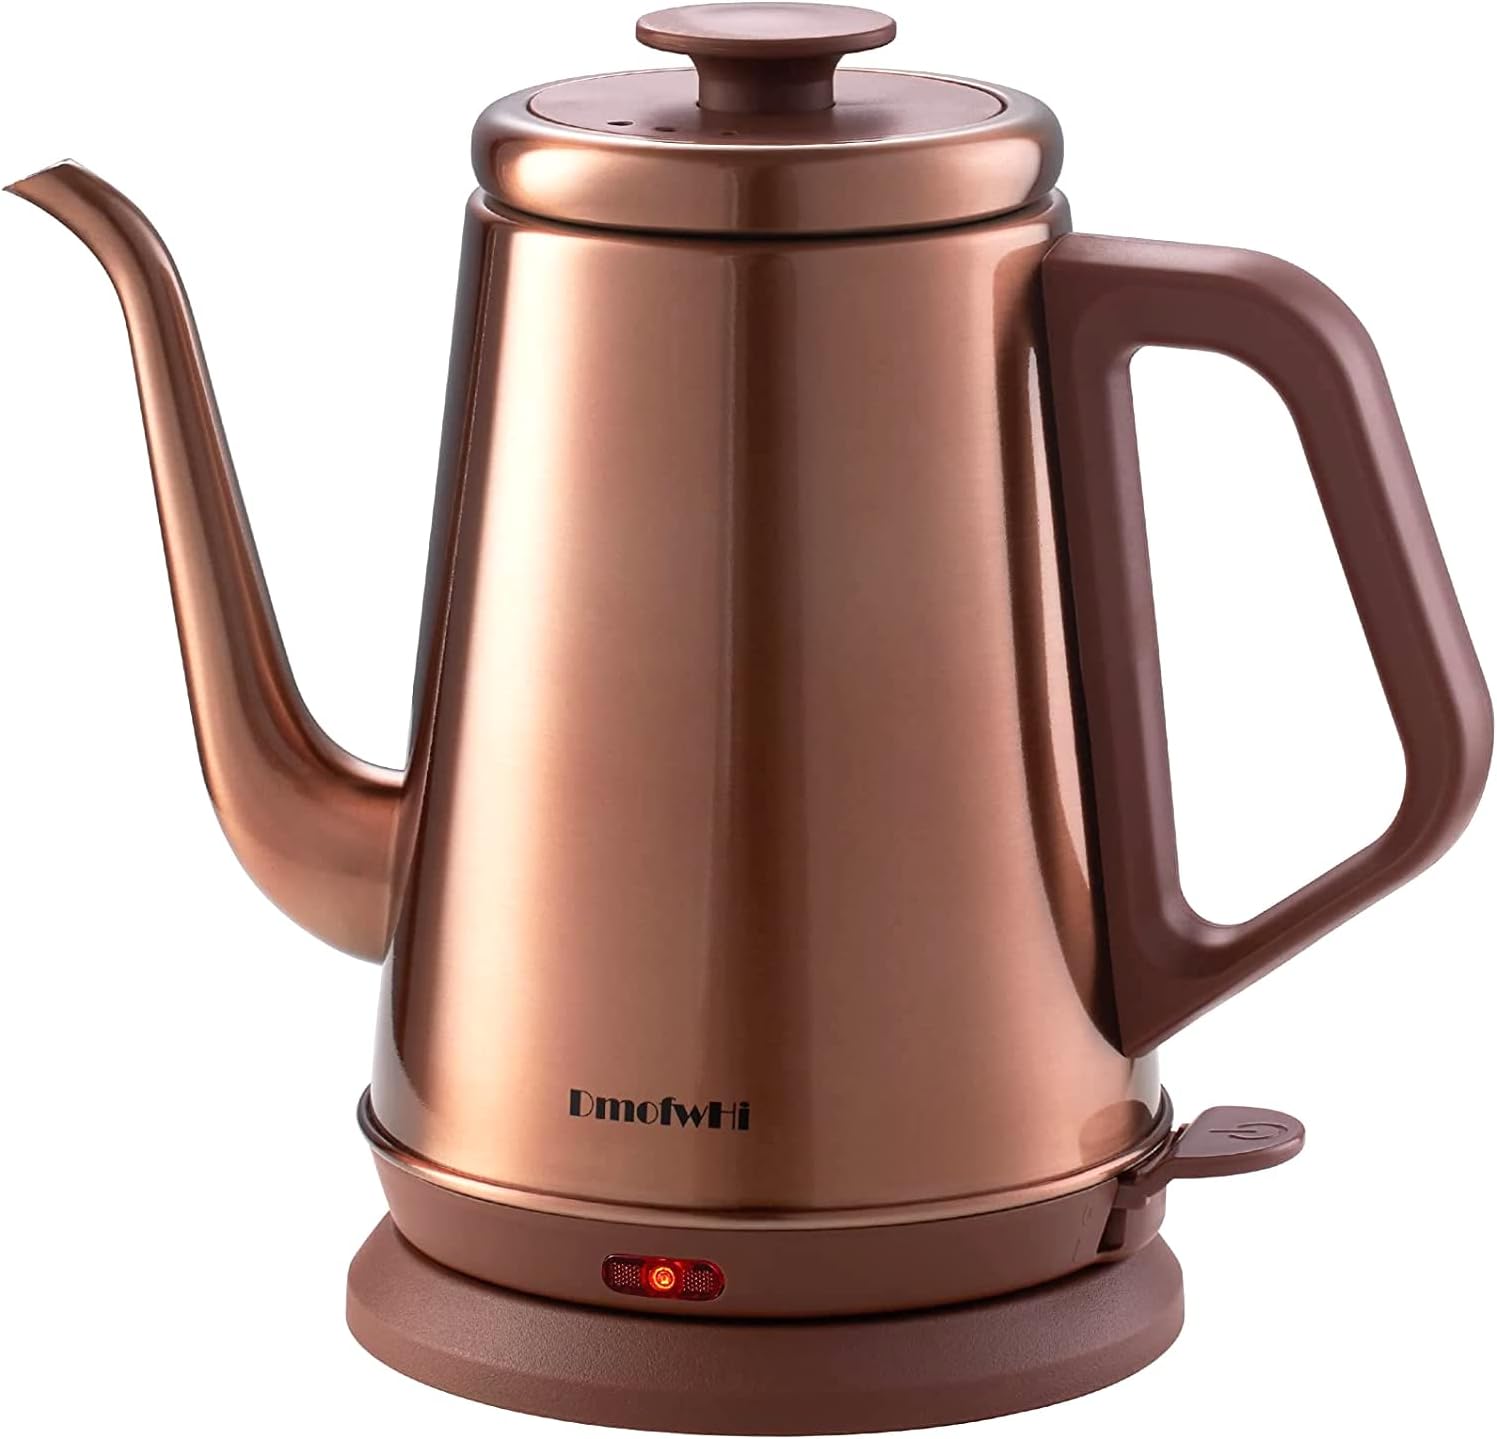 OFFACY COOL TOUCH ELECTRIC TEA KETTLE RETAIL 27.99 - Dallas Online Auction  Company